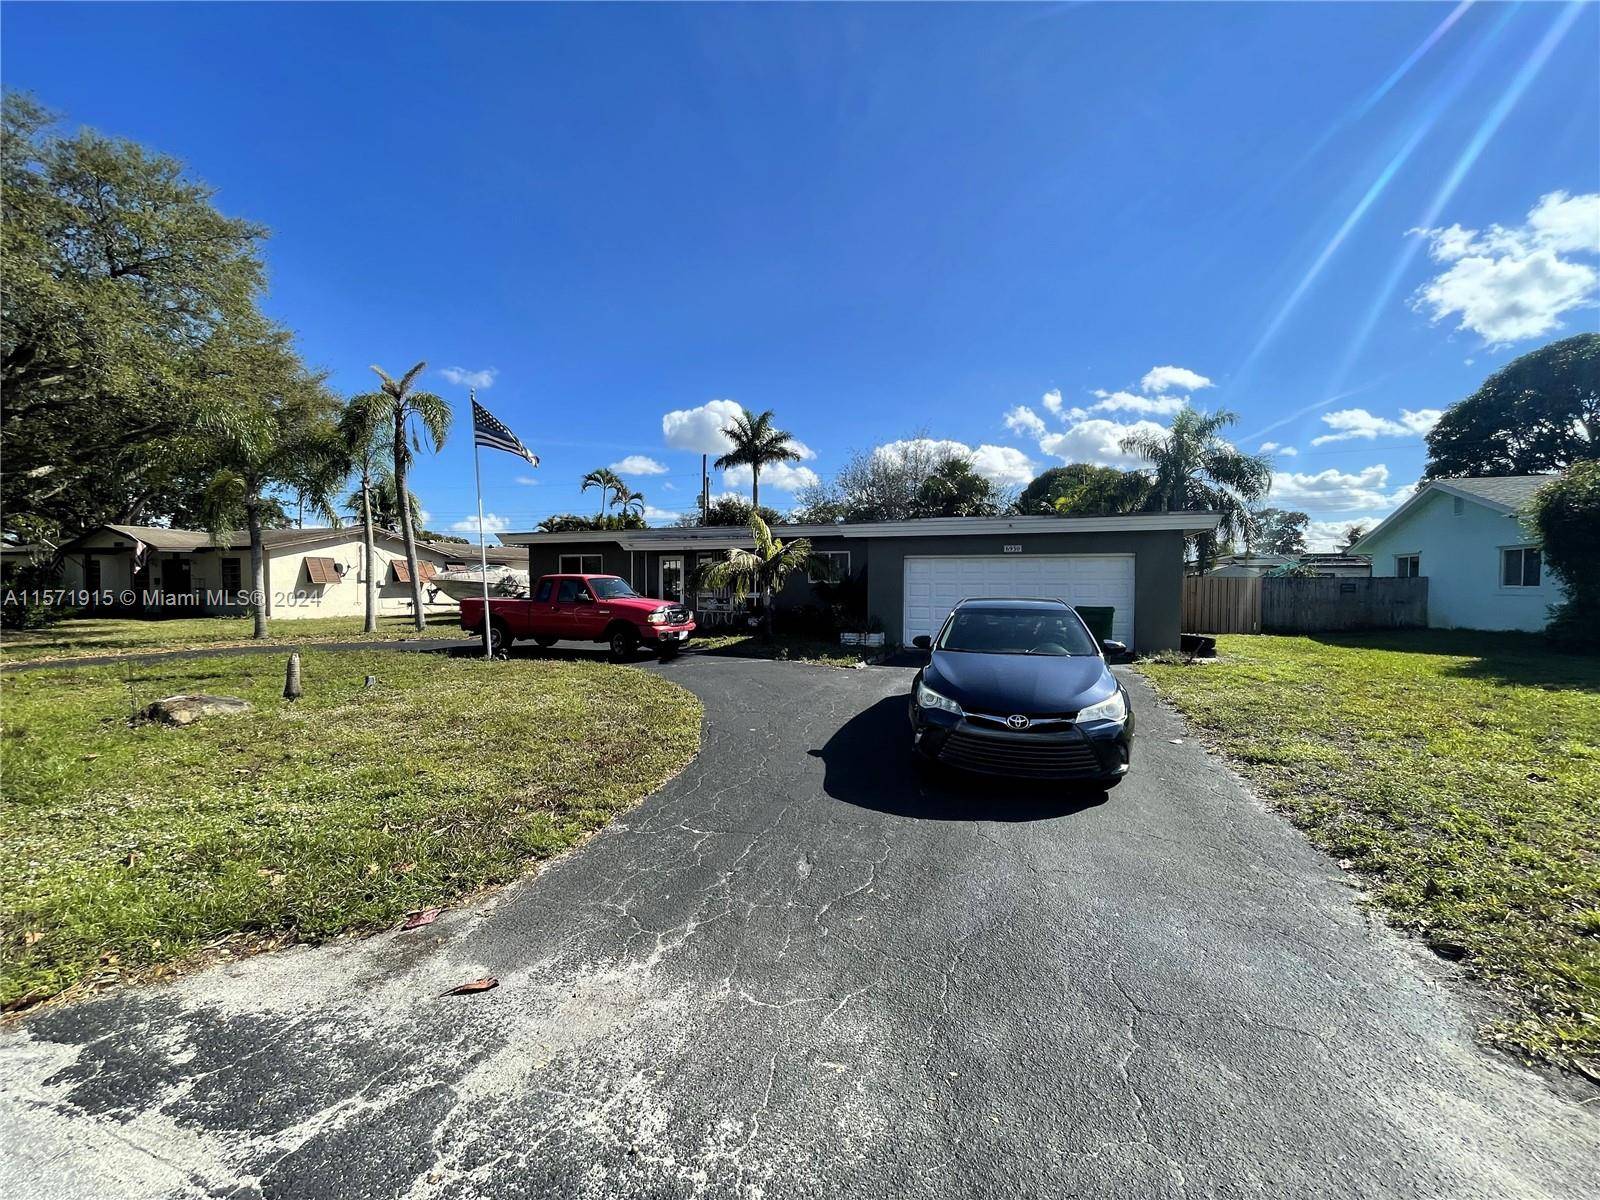 Welcome to this charming home with excellent potential located in Pembroke Pines.